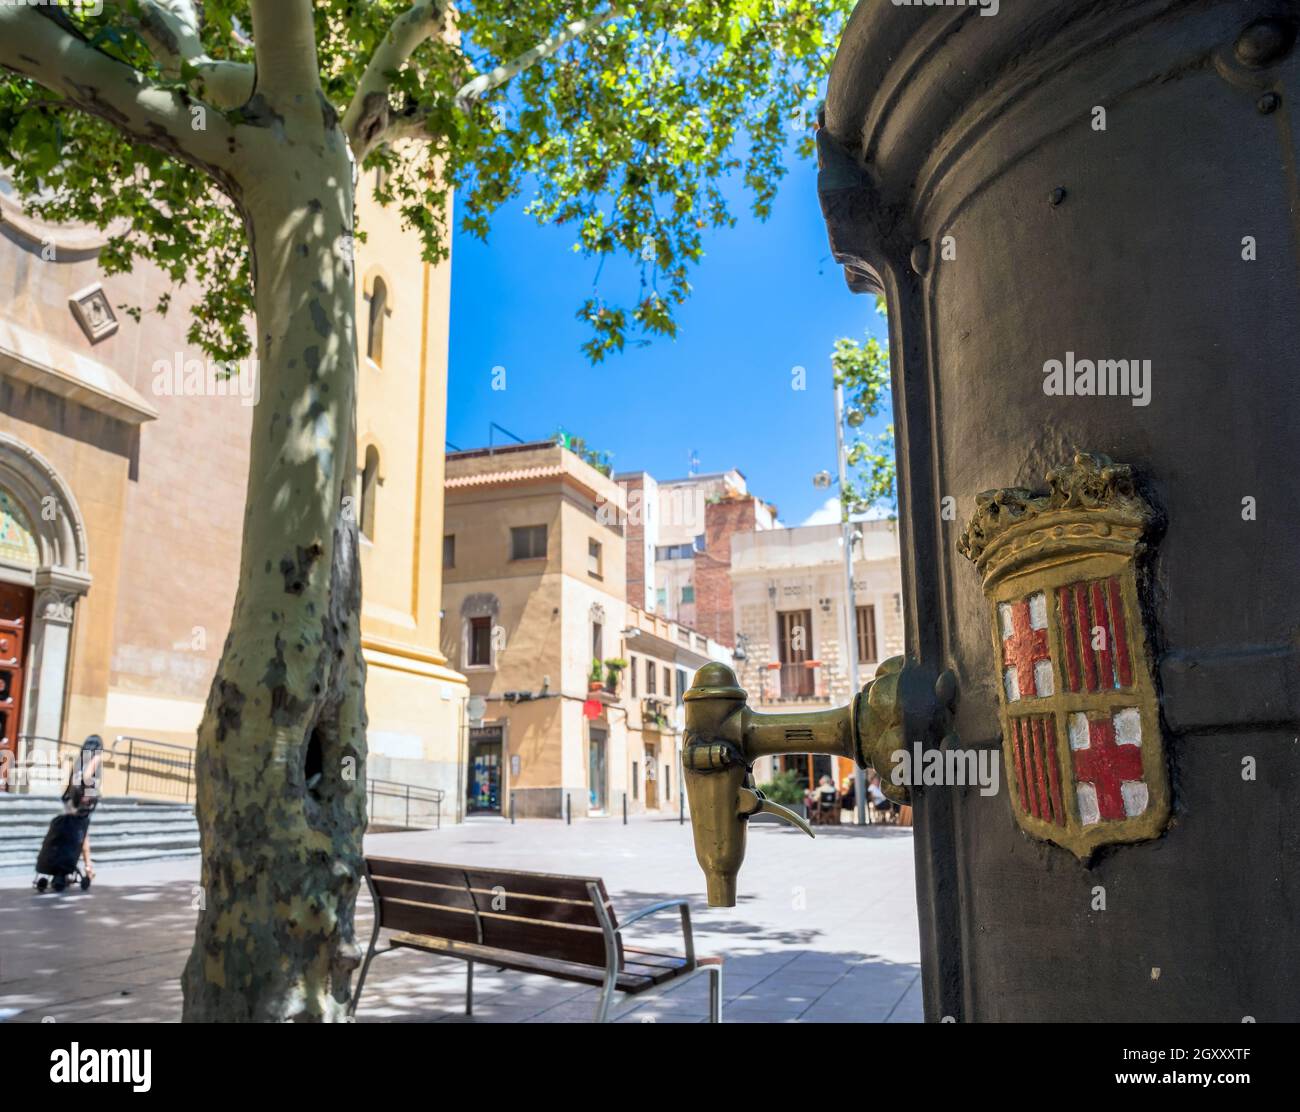 Barcelona, Spain - July 5, 2017: detail of a drinking water fountain with city badge in Les Corts, Barcelona, Spain. Stock Photo